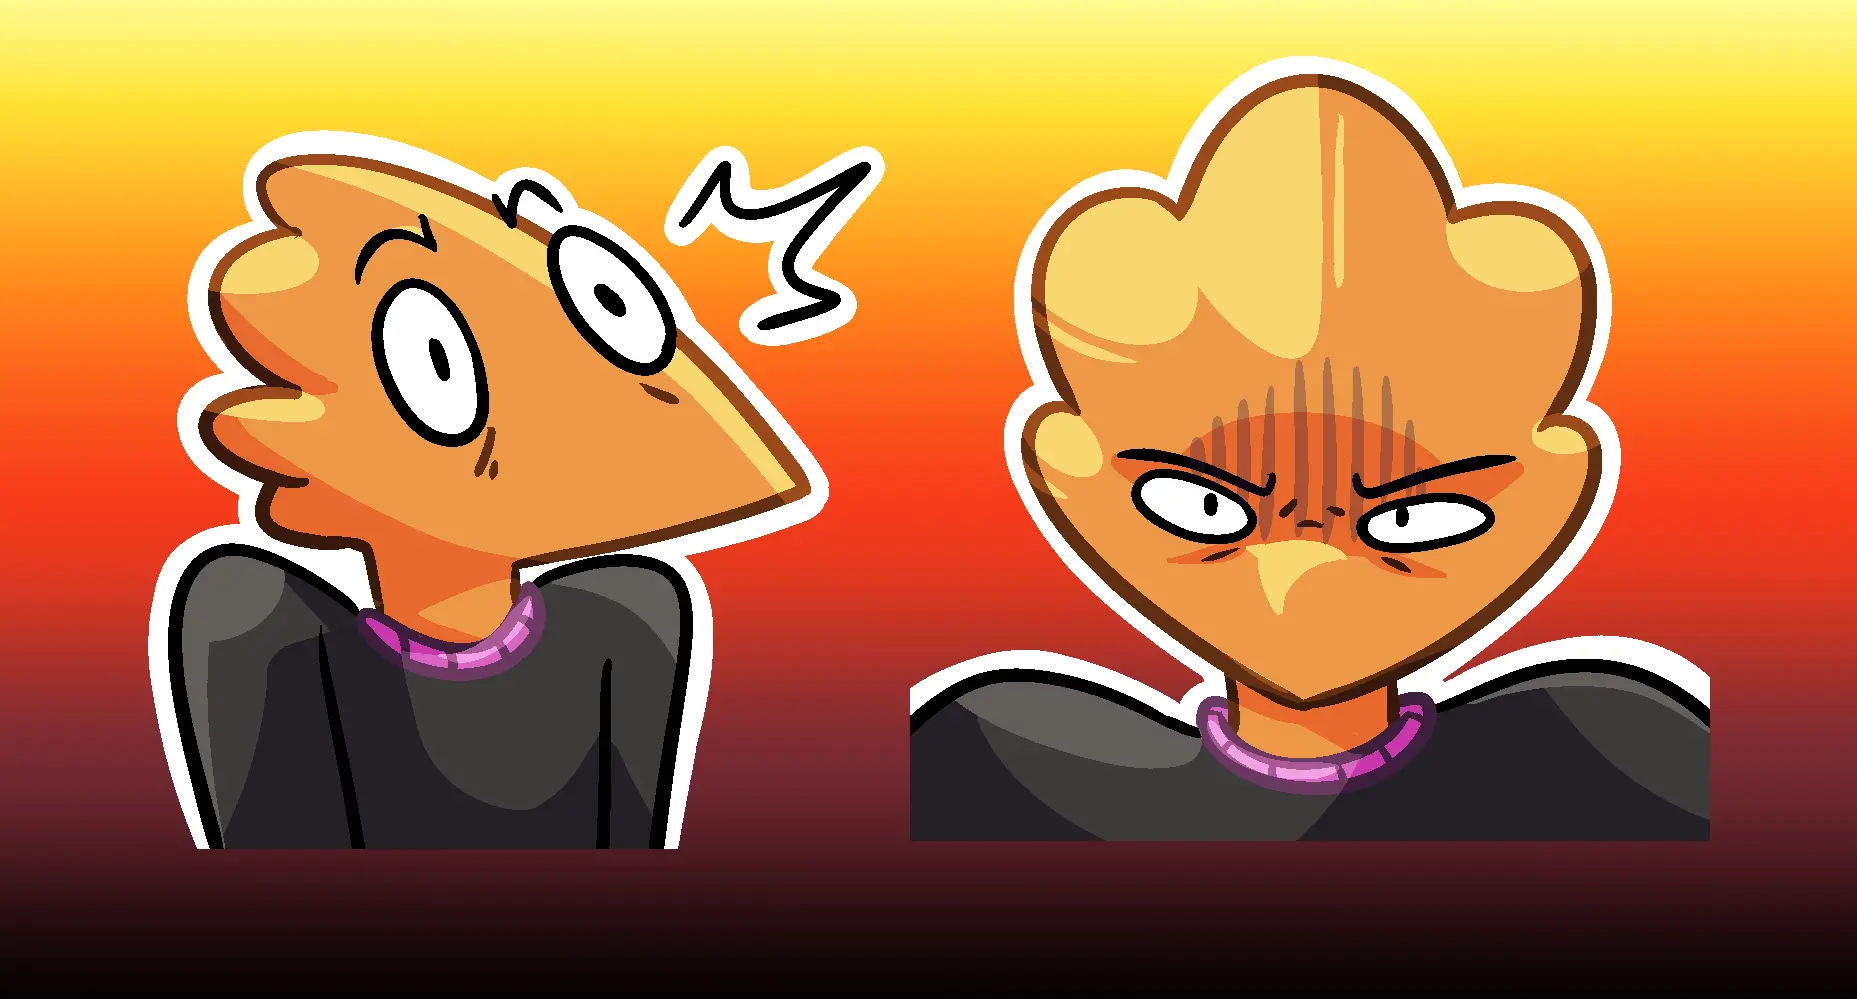 squangus emotes 1 final.png